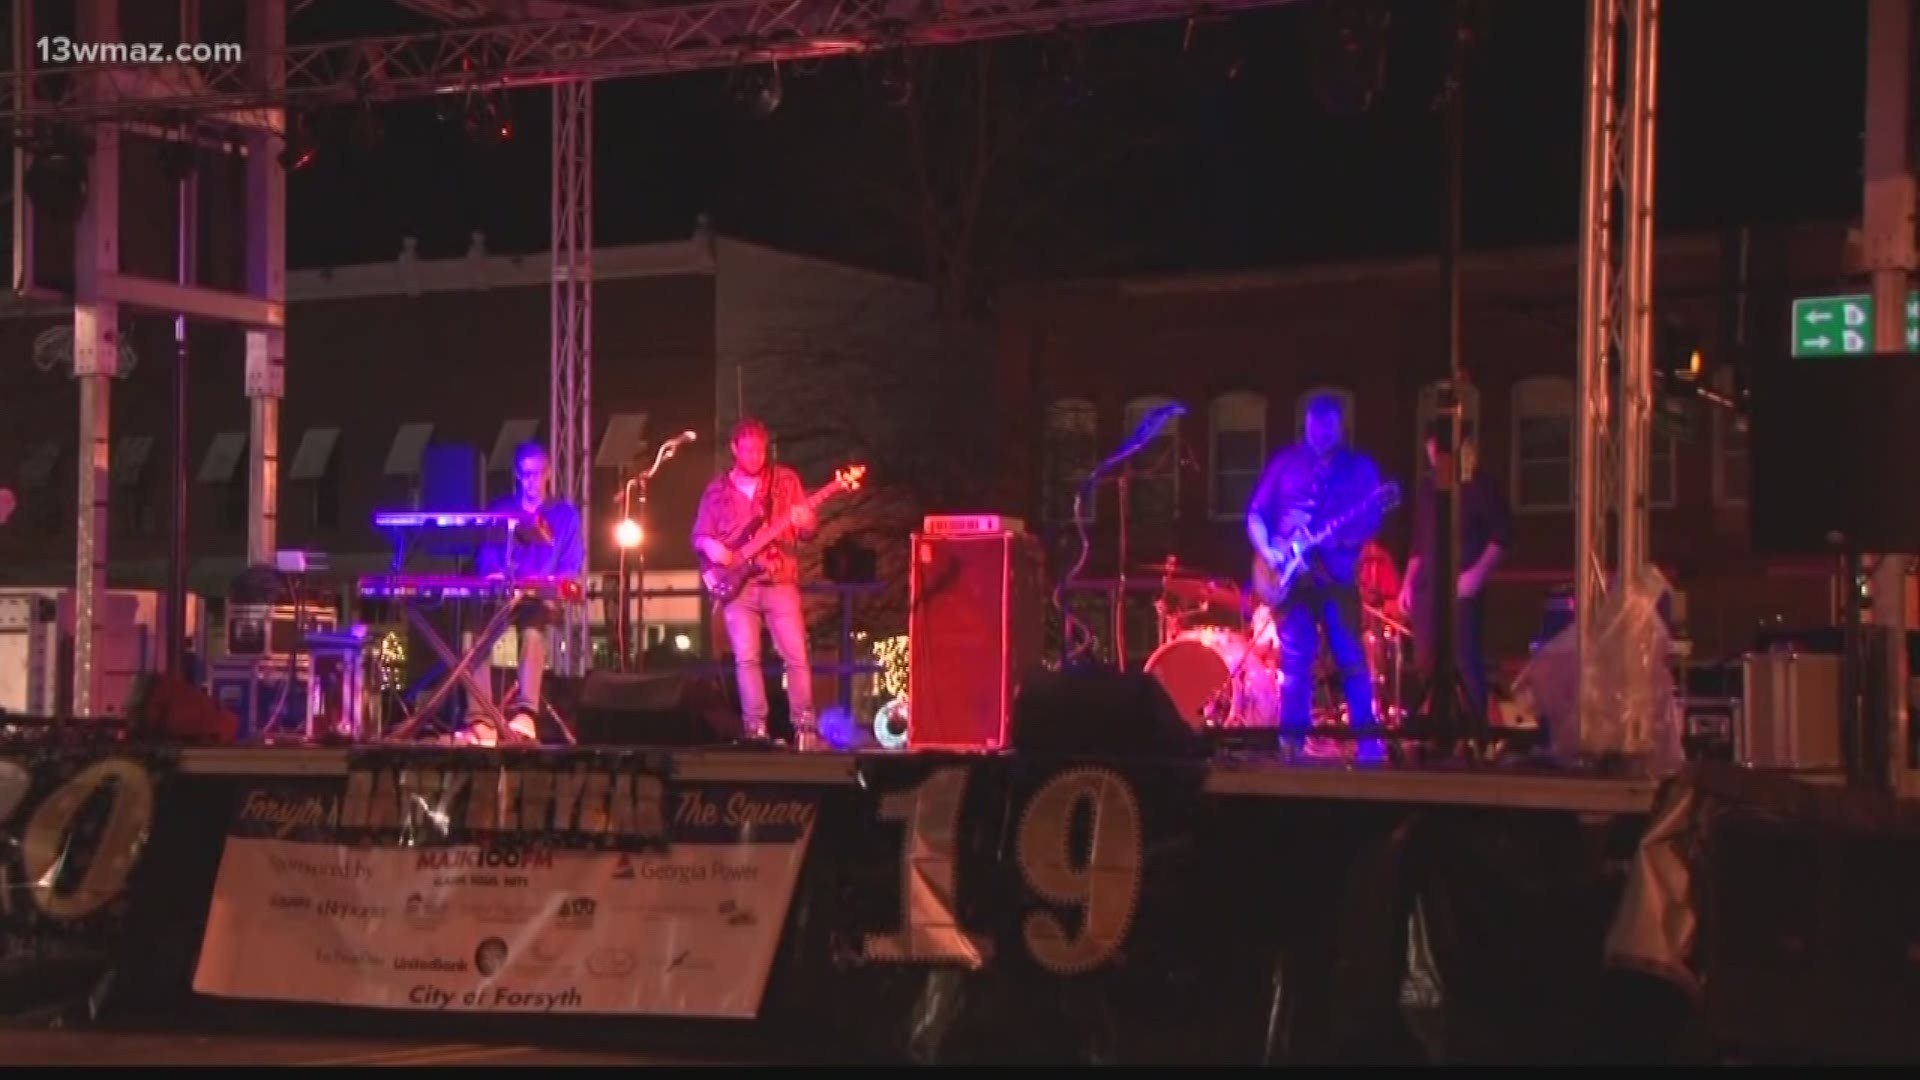 People in Monroe County gathered in Forsyth Town Square to spend time with family and watch the ball drop.